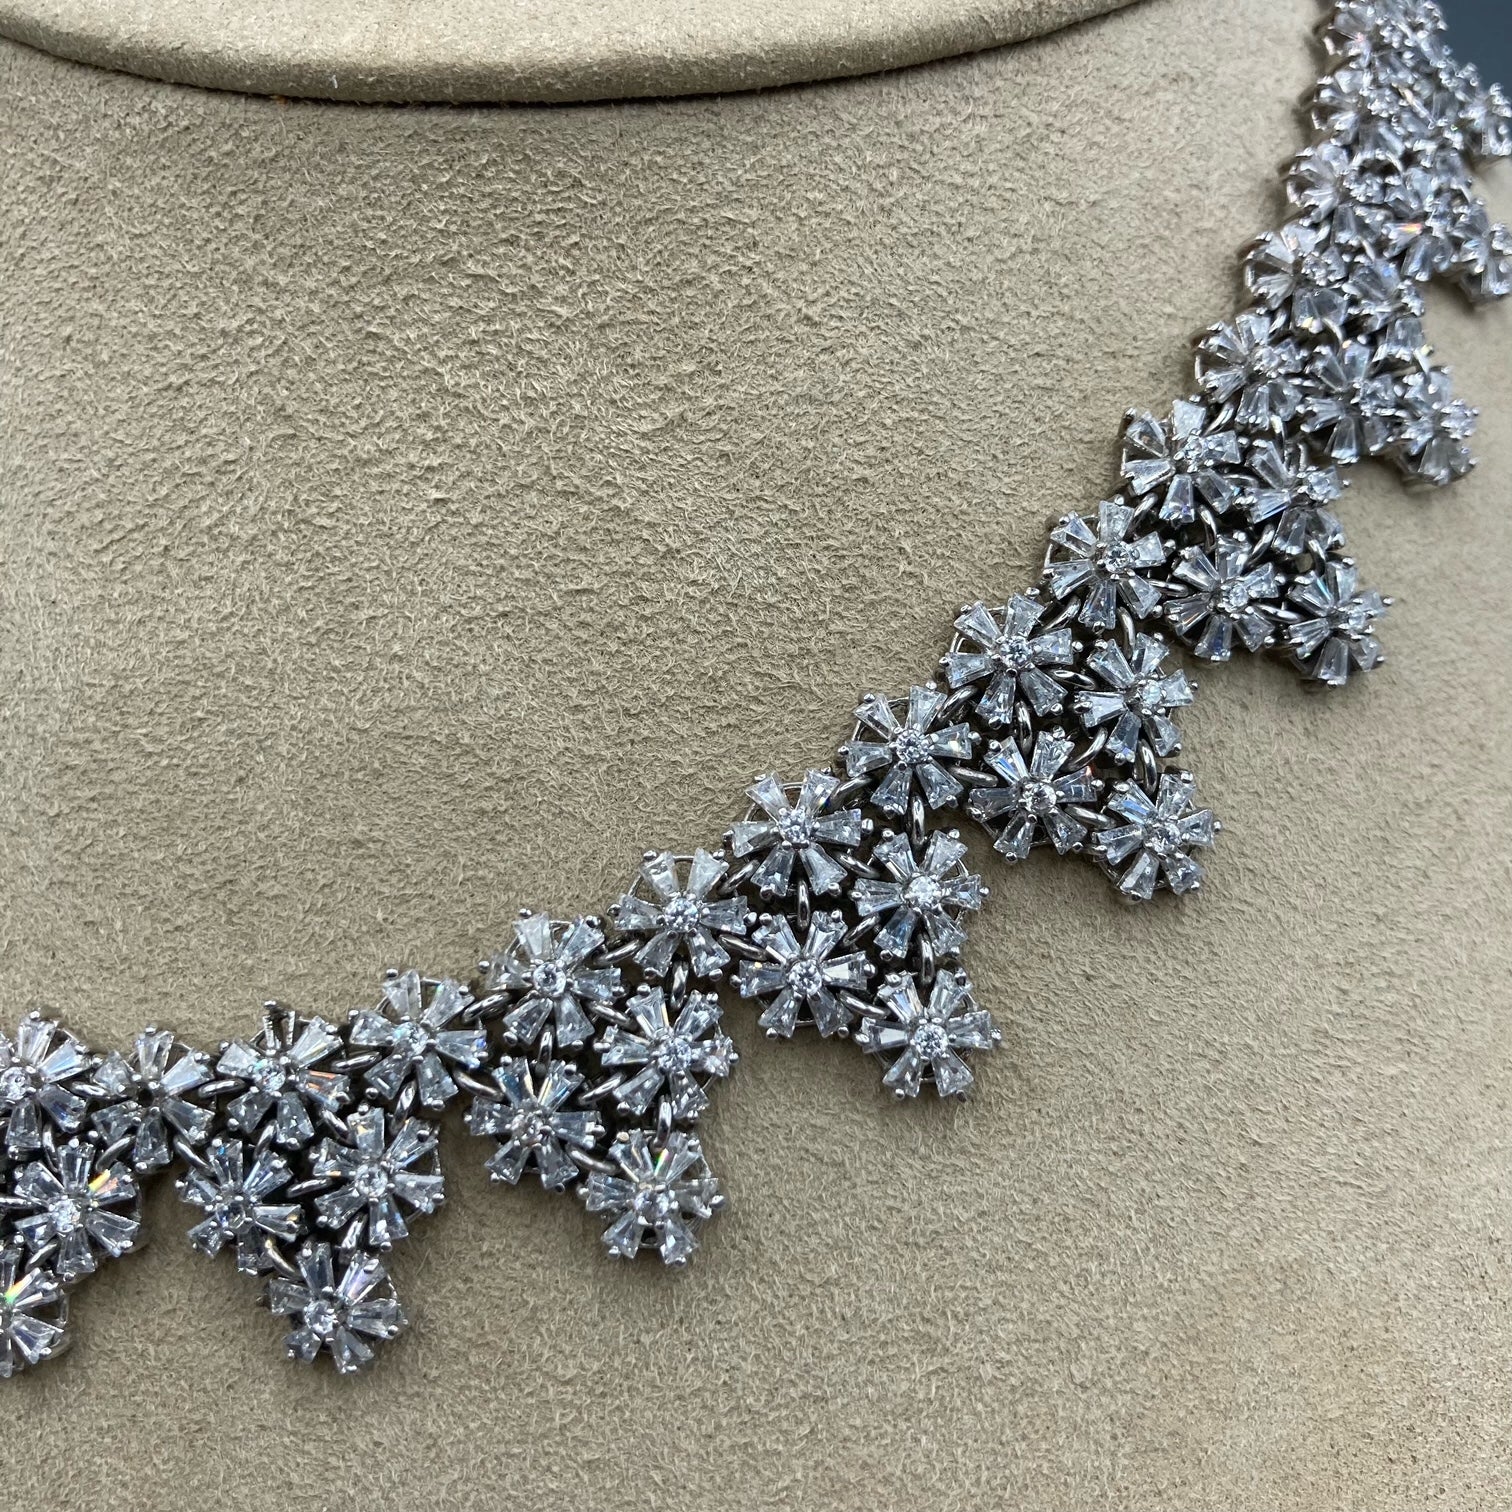 18k White Gold CZ Necklace with Cluster Snowflake Pattern